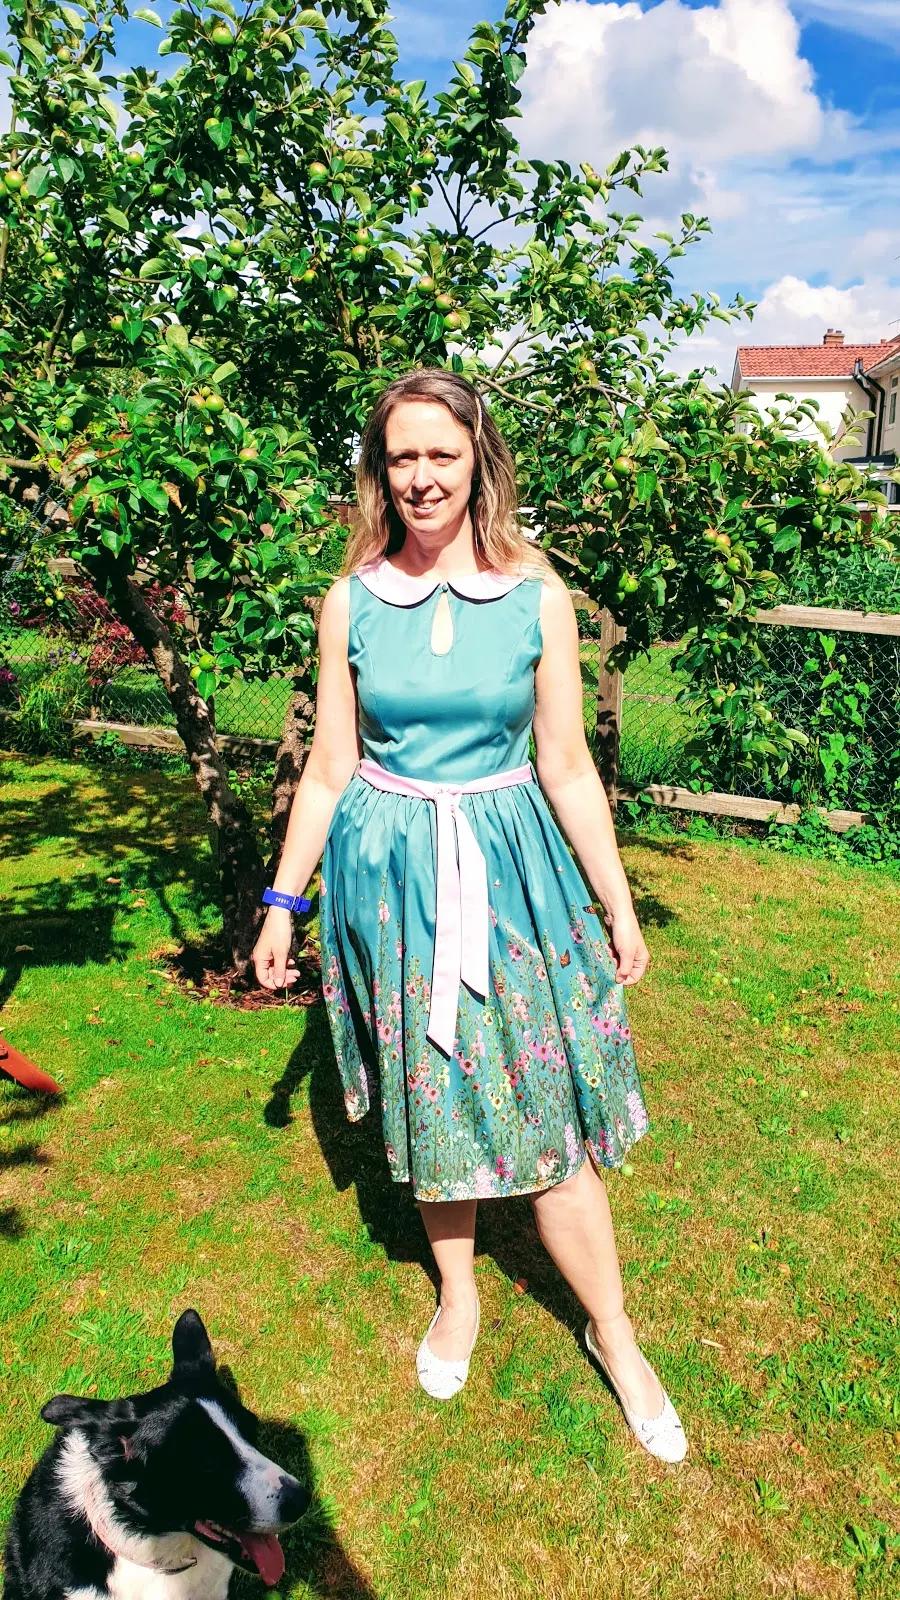 Vintage Swing Dress And Afternoon Tea In The Garden | Claire's World